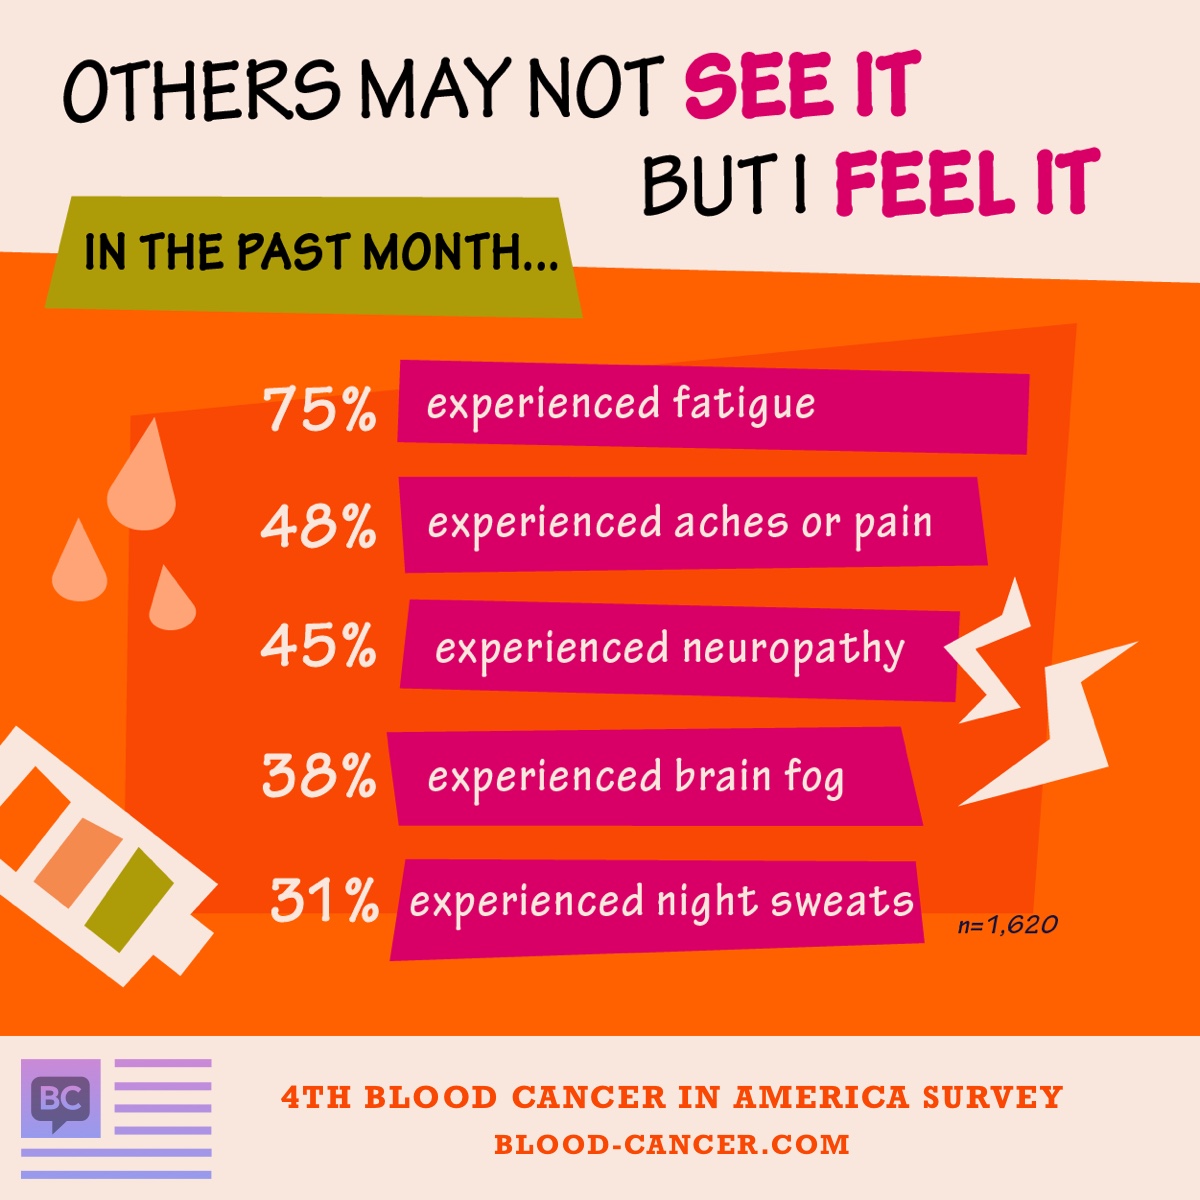 In the past month, of the people surveyed, 75% experienced fatigue, 48% experienced aches or pain, 45% experienced neuropathy, 38% experienced brain fog, and 31% experienced night sweats.